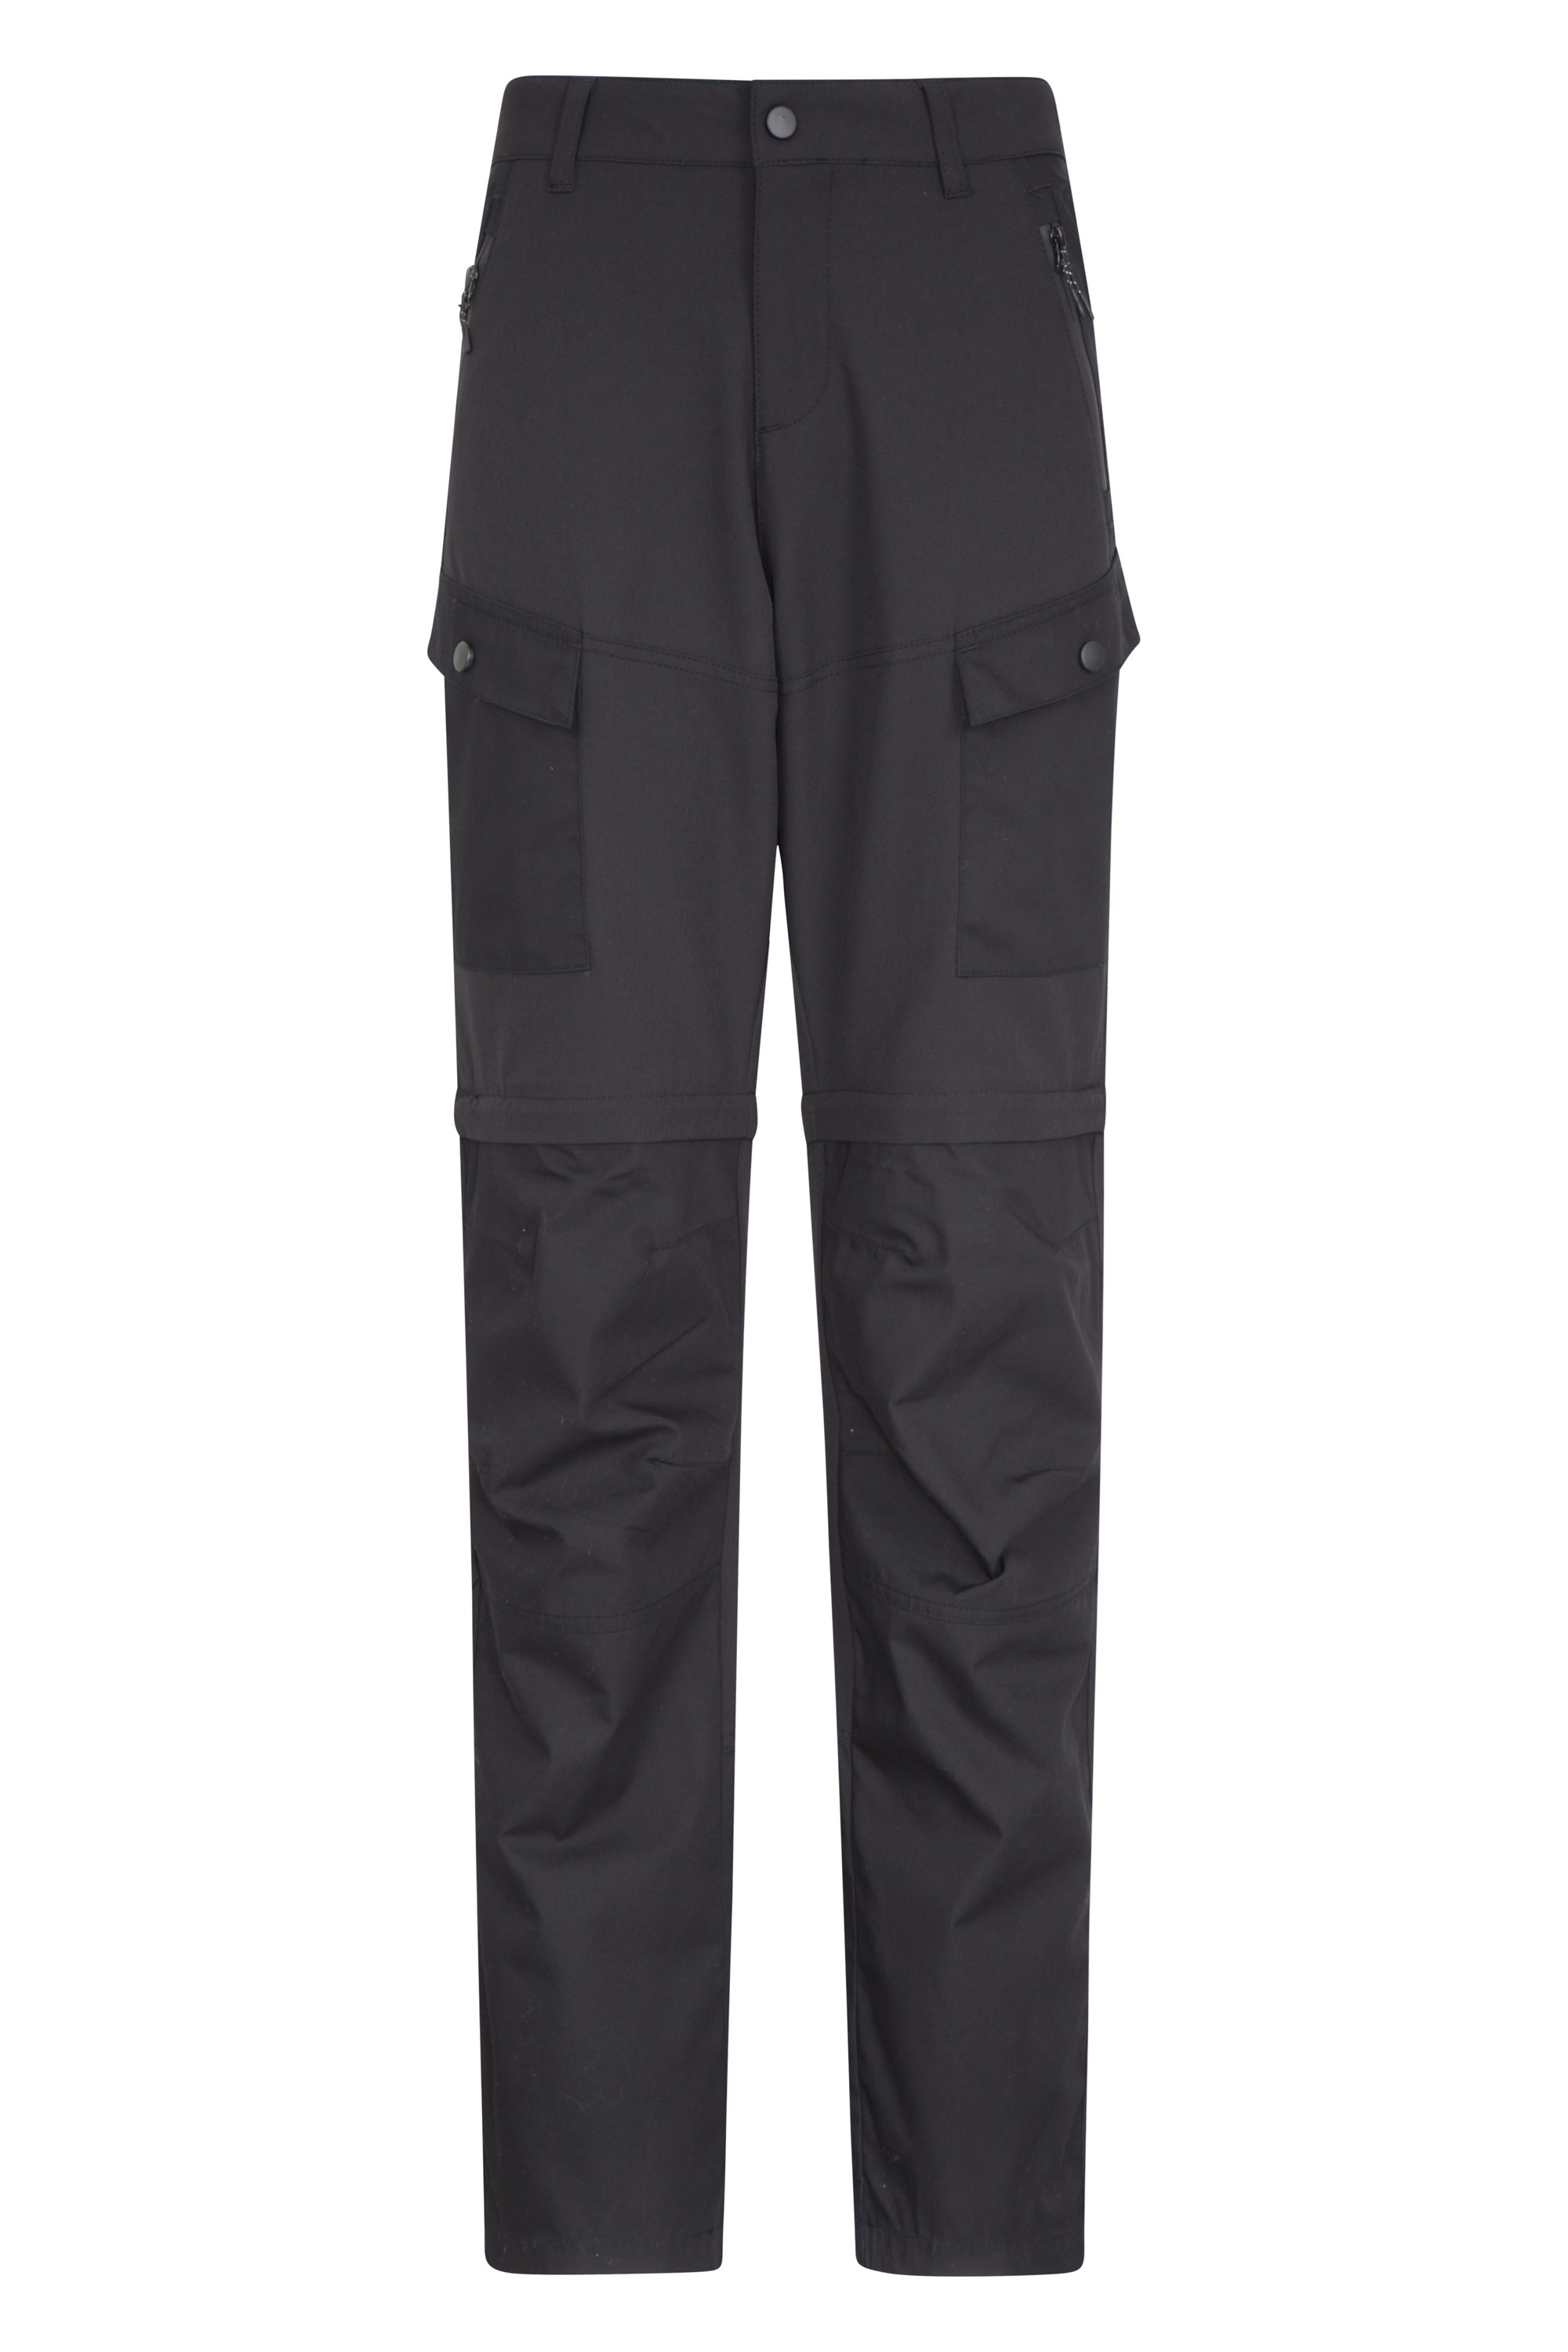 038272 EXPEDITION HYBRID WOMENS ZIP OFF TROUSERS